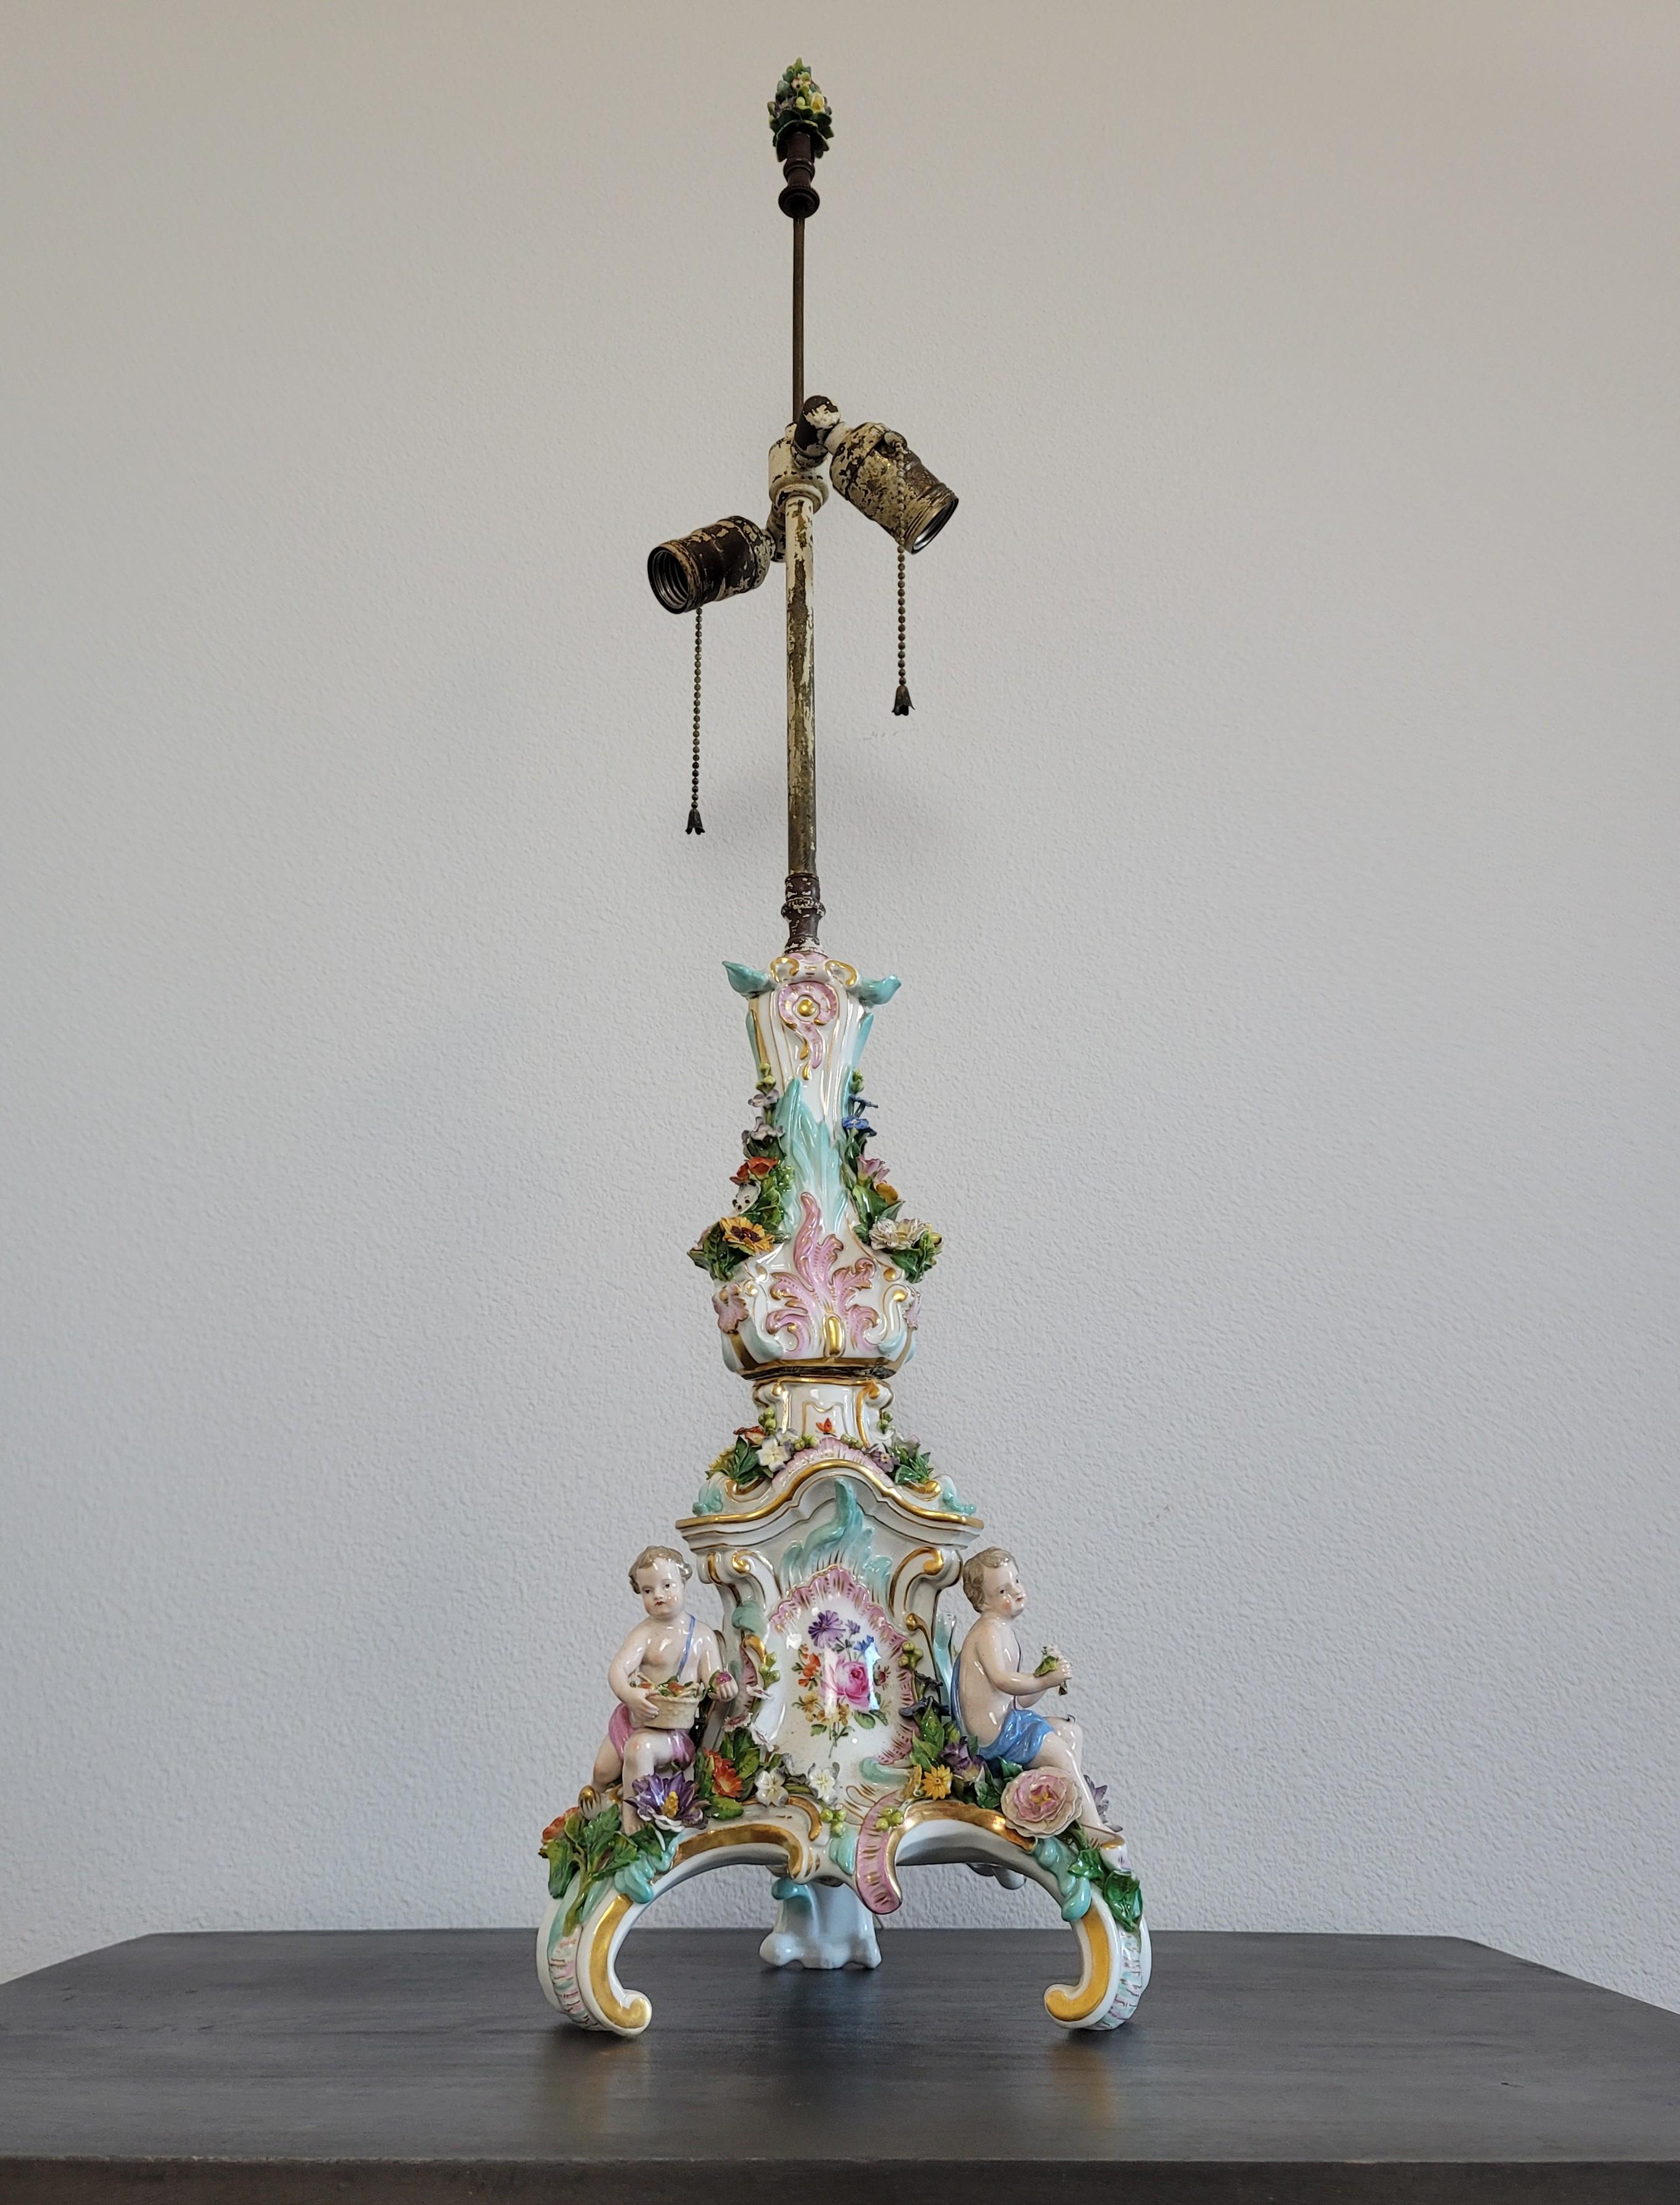 A stunning antique, circa 1880s, Dresden porcelain figural flower encrusted candlestick - candelabra mounted as a lamp. 

Exquisitely handmade and painted in Germany in the late 19th century, developed by Ernst August Leuteritz, the very finest of